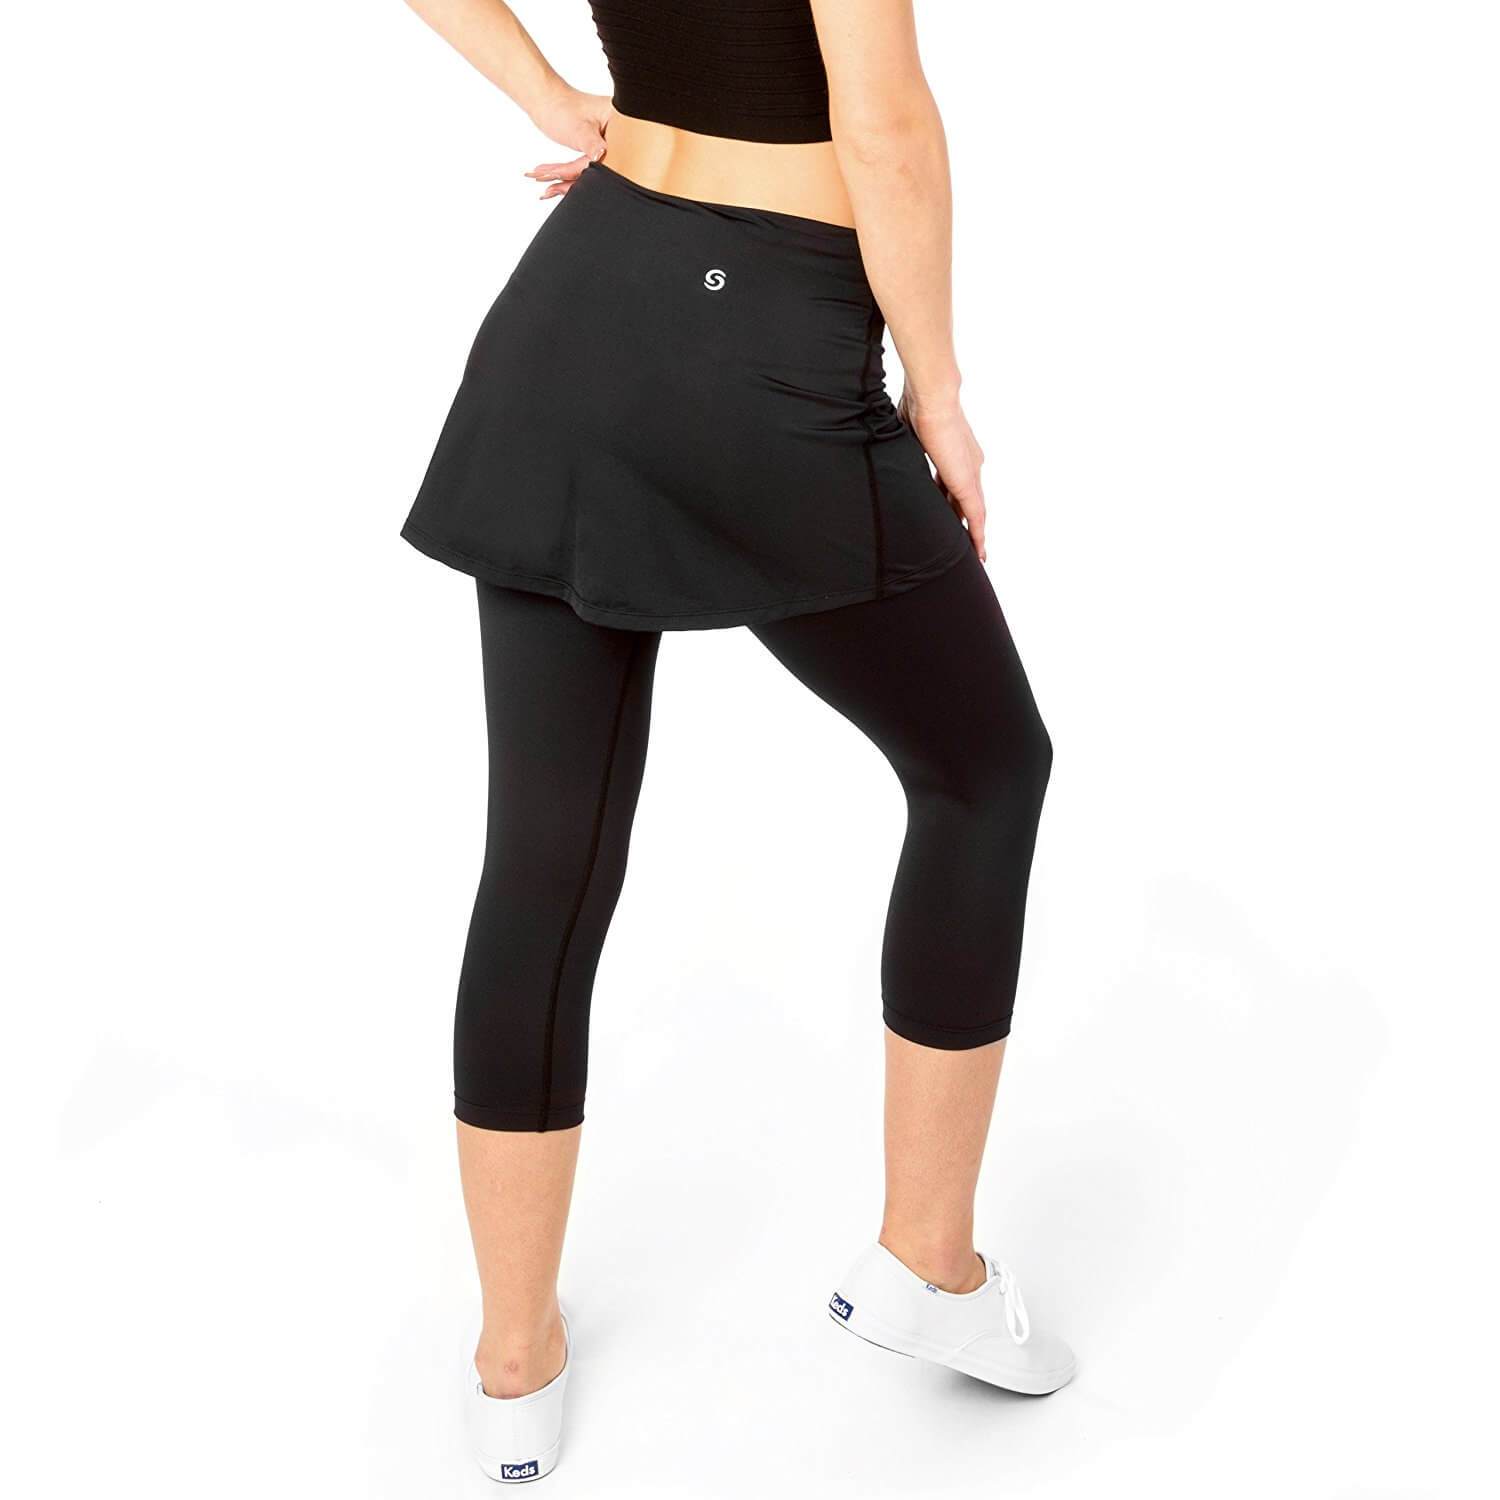 workout pants with skirt attached